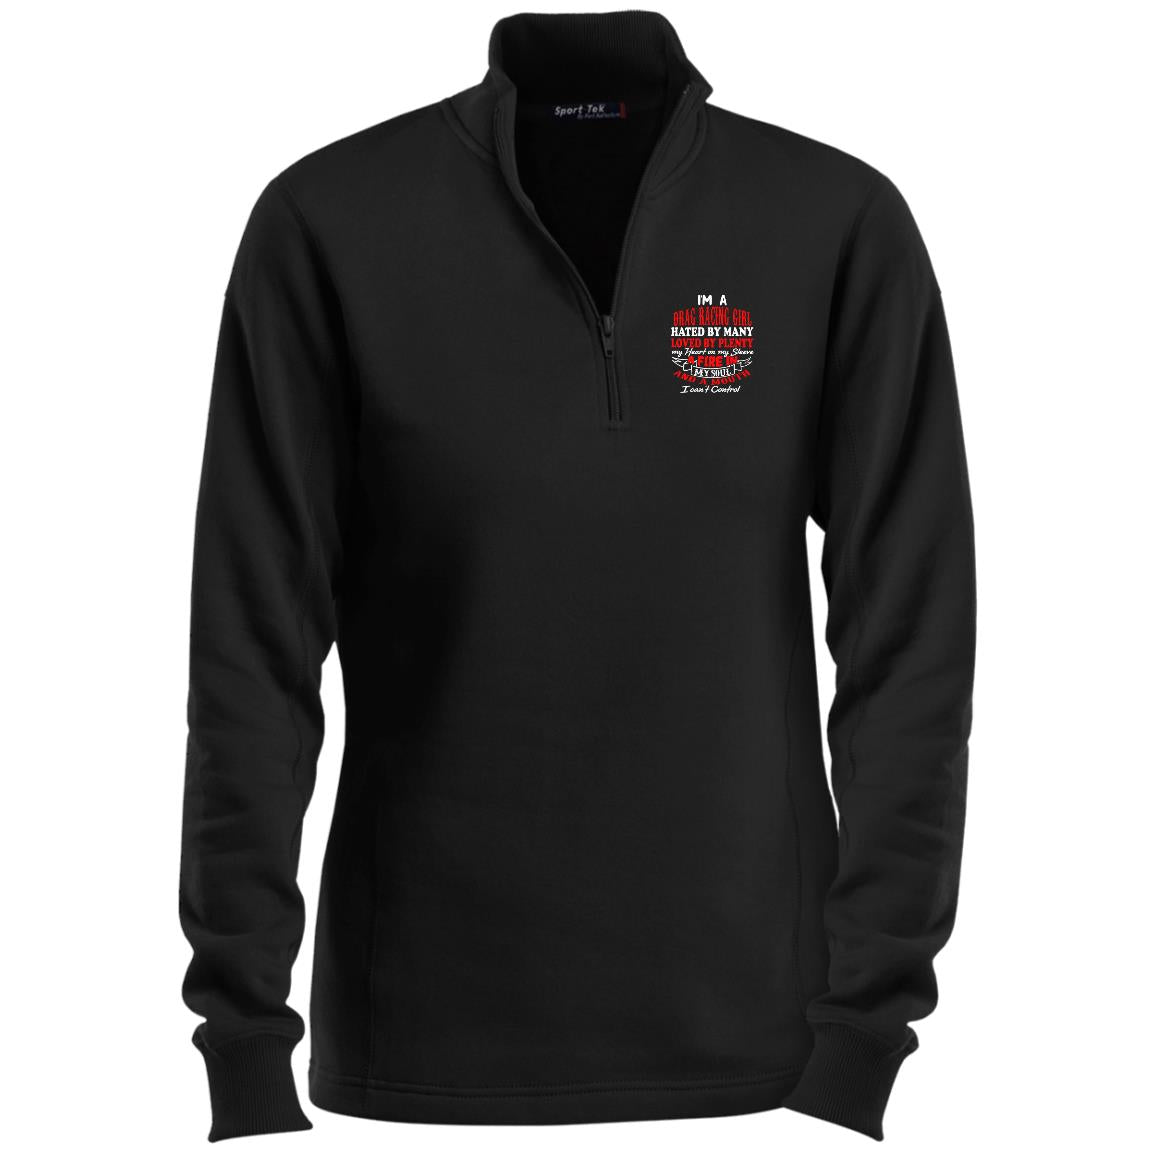 I'm A Drag Racing Girl Hated By Many Loved By Plenty Ladies 1/4 Zip Sweatshirt